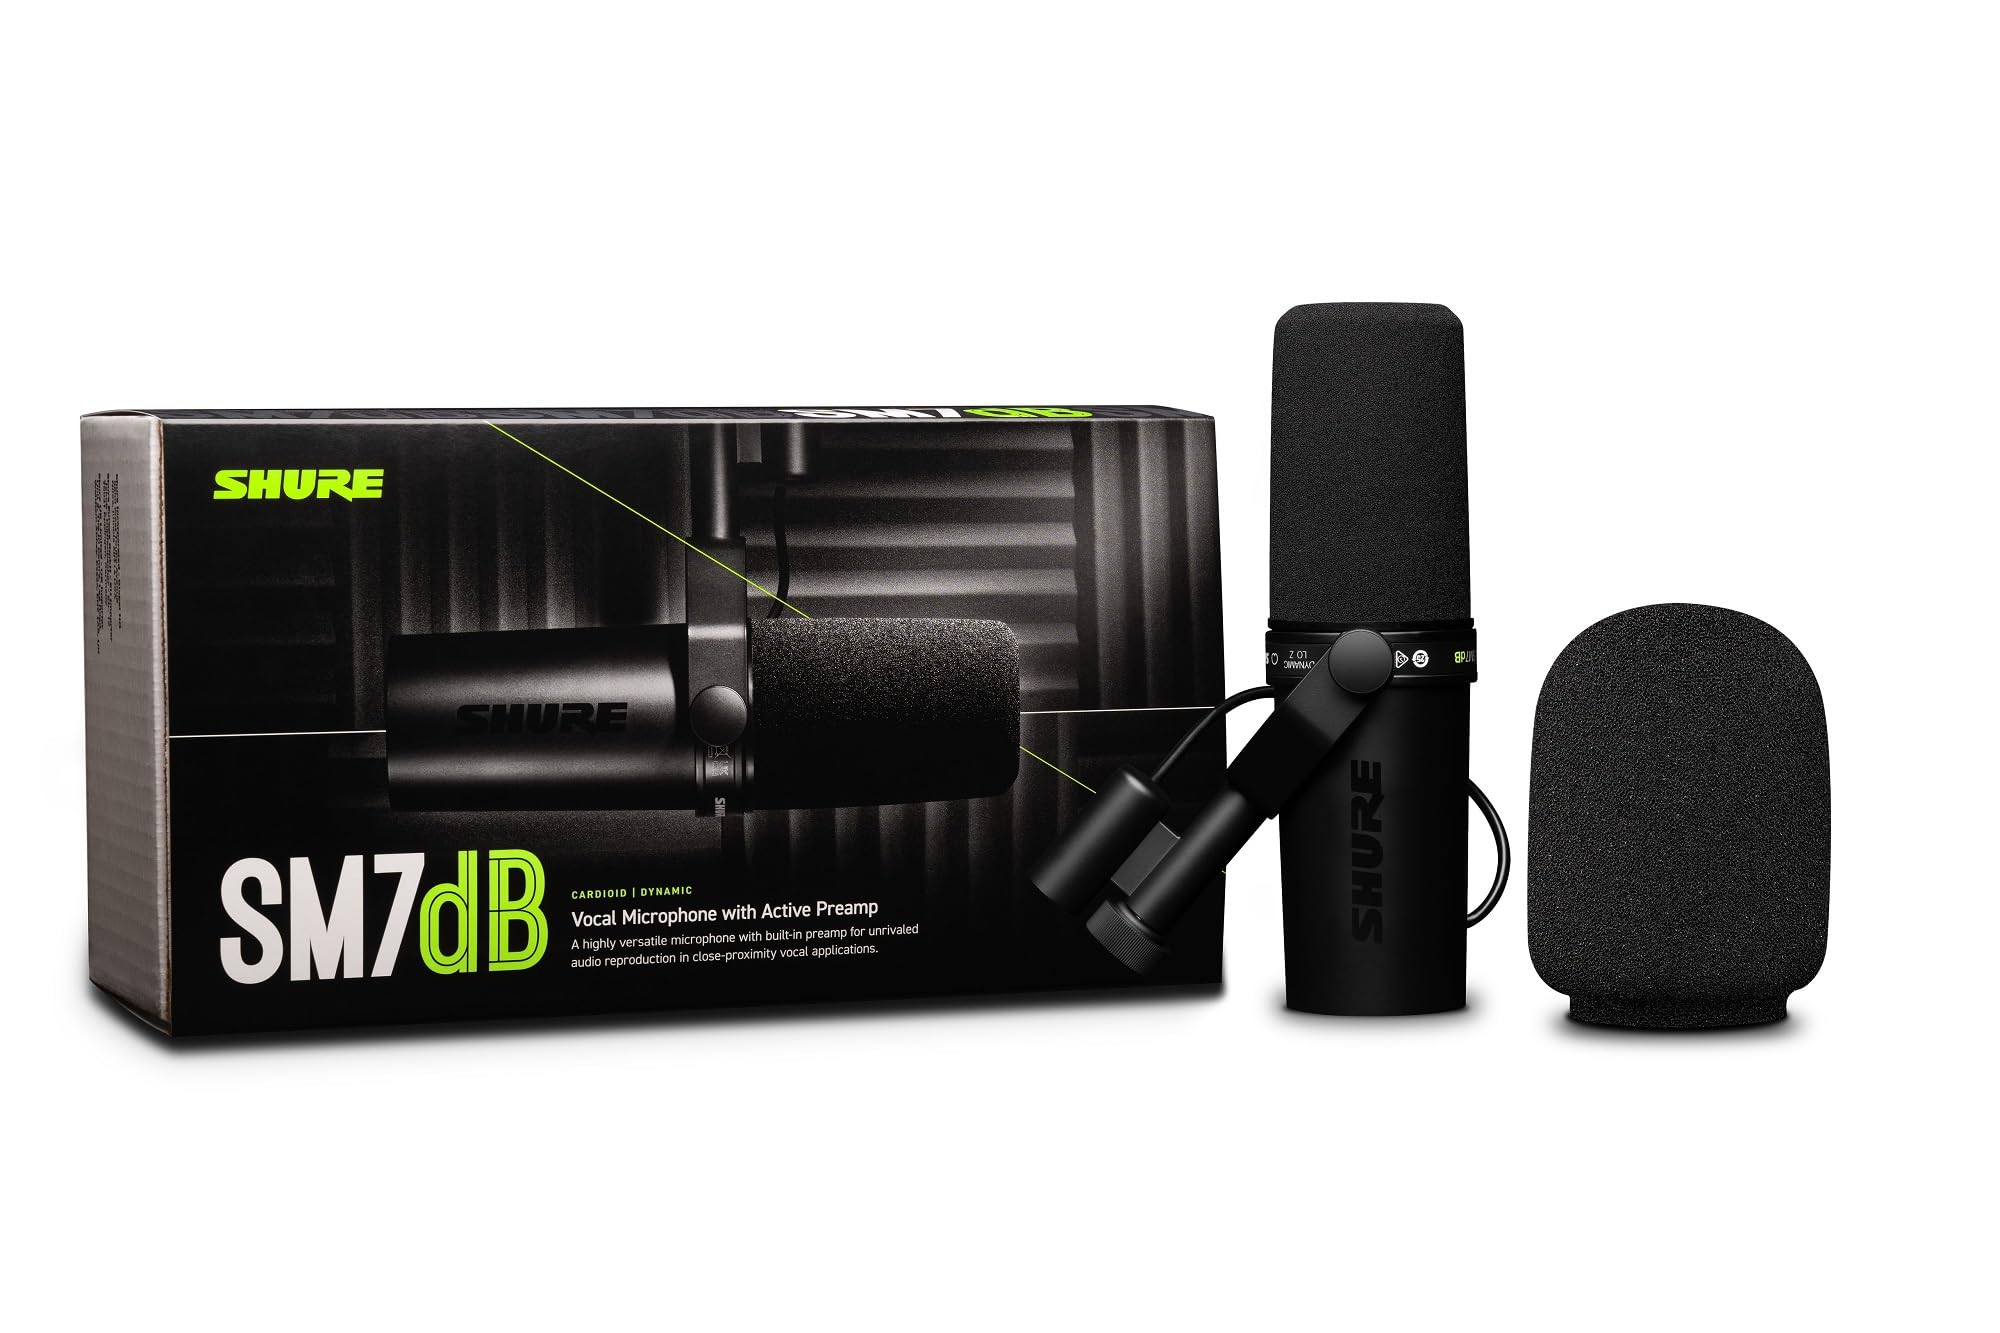 Shure SM7dB Dynamic Vocal Microphone w/Built-in Preamp for Streaming, Podcast, & Recording, Wide-Range Frequency, Warm & Smooth Sound, Rugged Construction, Detachable Windscreen - Black